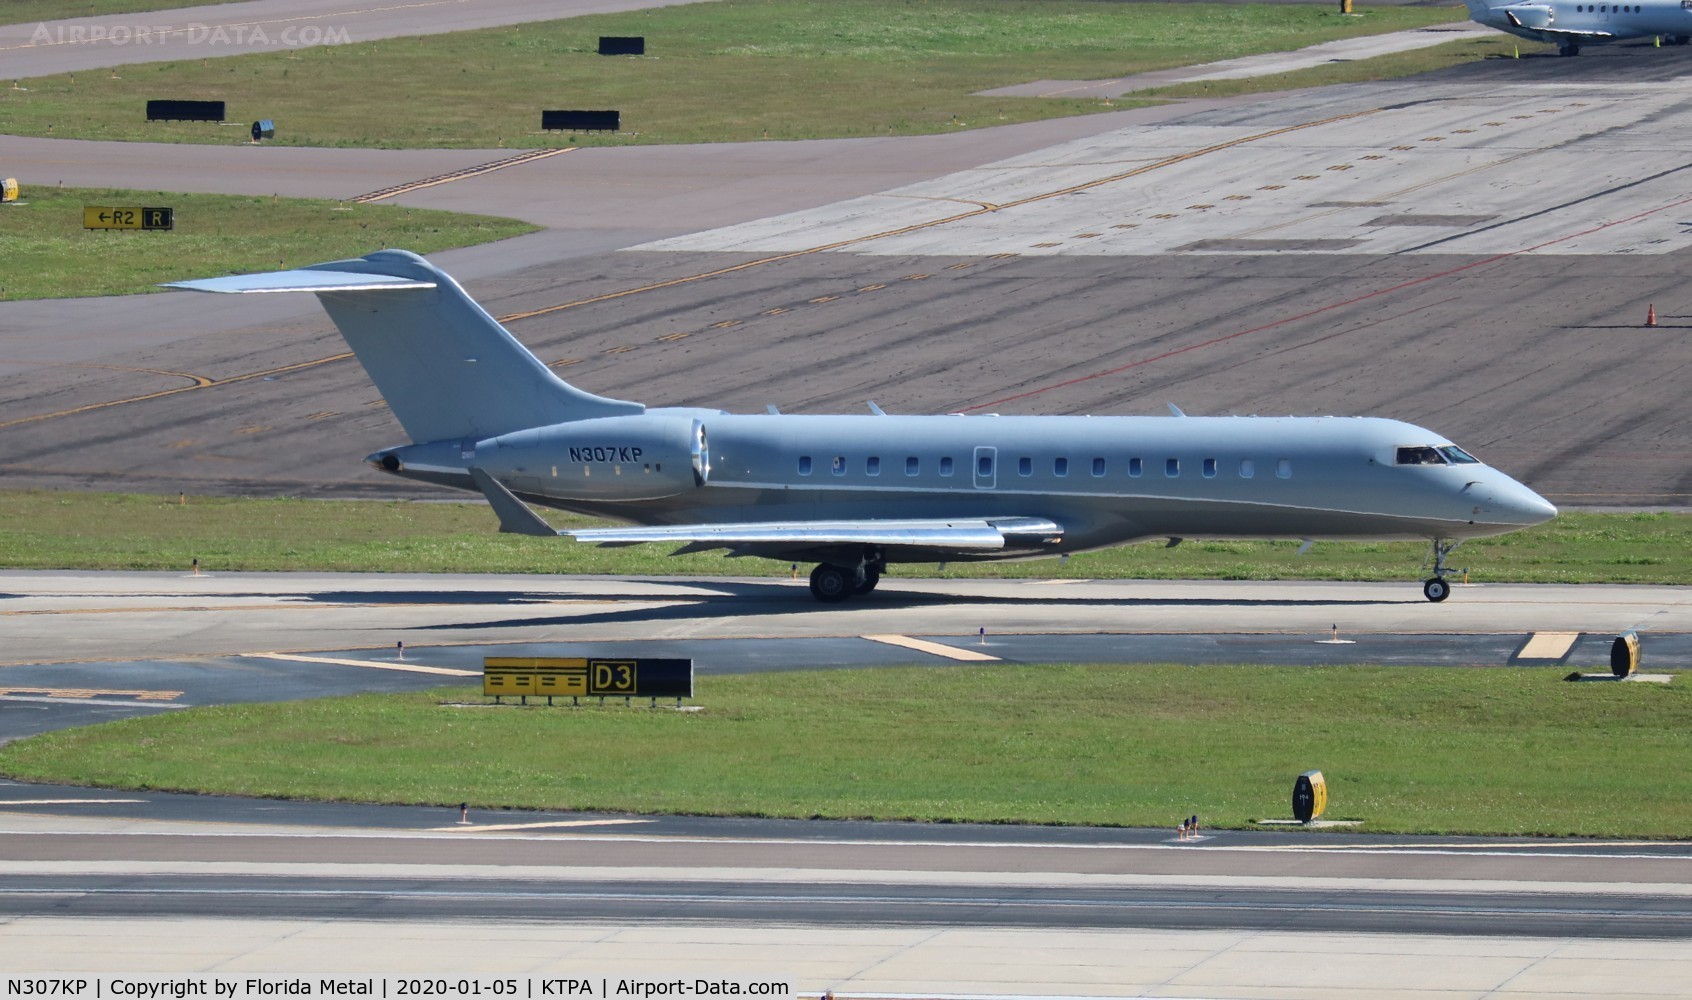 N307KP, 2003 Bombardier BD-700-1A10 Global Express C/N 9120, Global Express zx TPA getting ready for a 1R departure